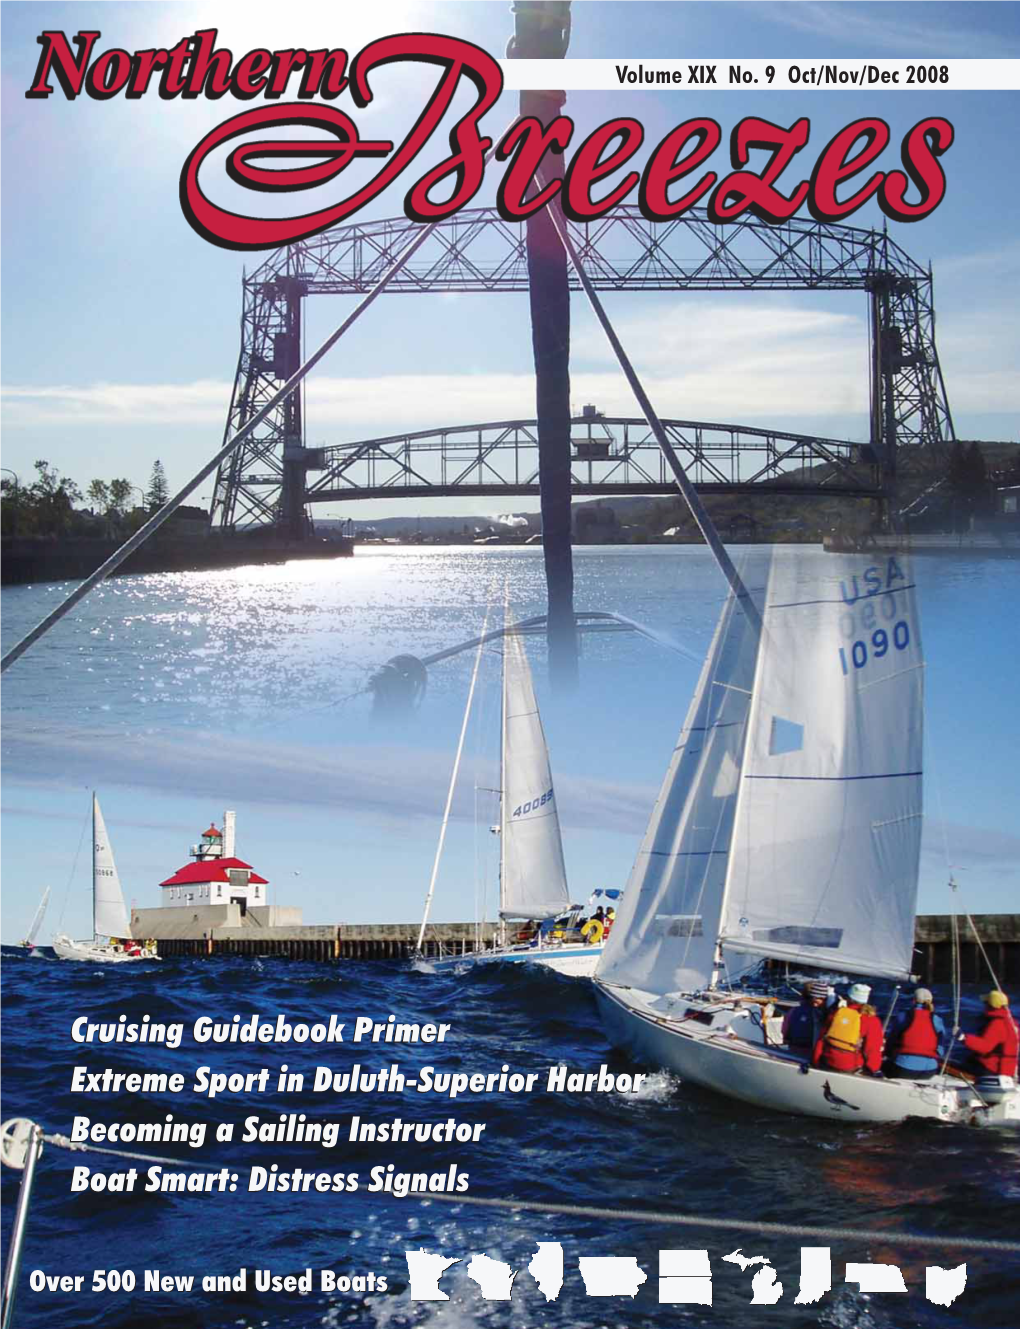 Cruising Guidebook Primer Extreme Sport in Duluth-Superior Harbor Becoming a Sailing Instructor Boat Smart: Distress Signals